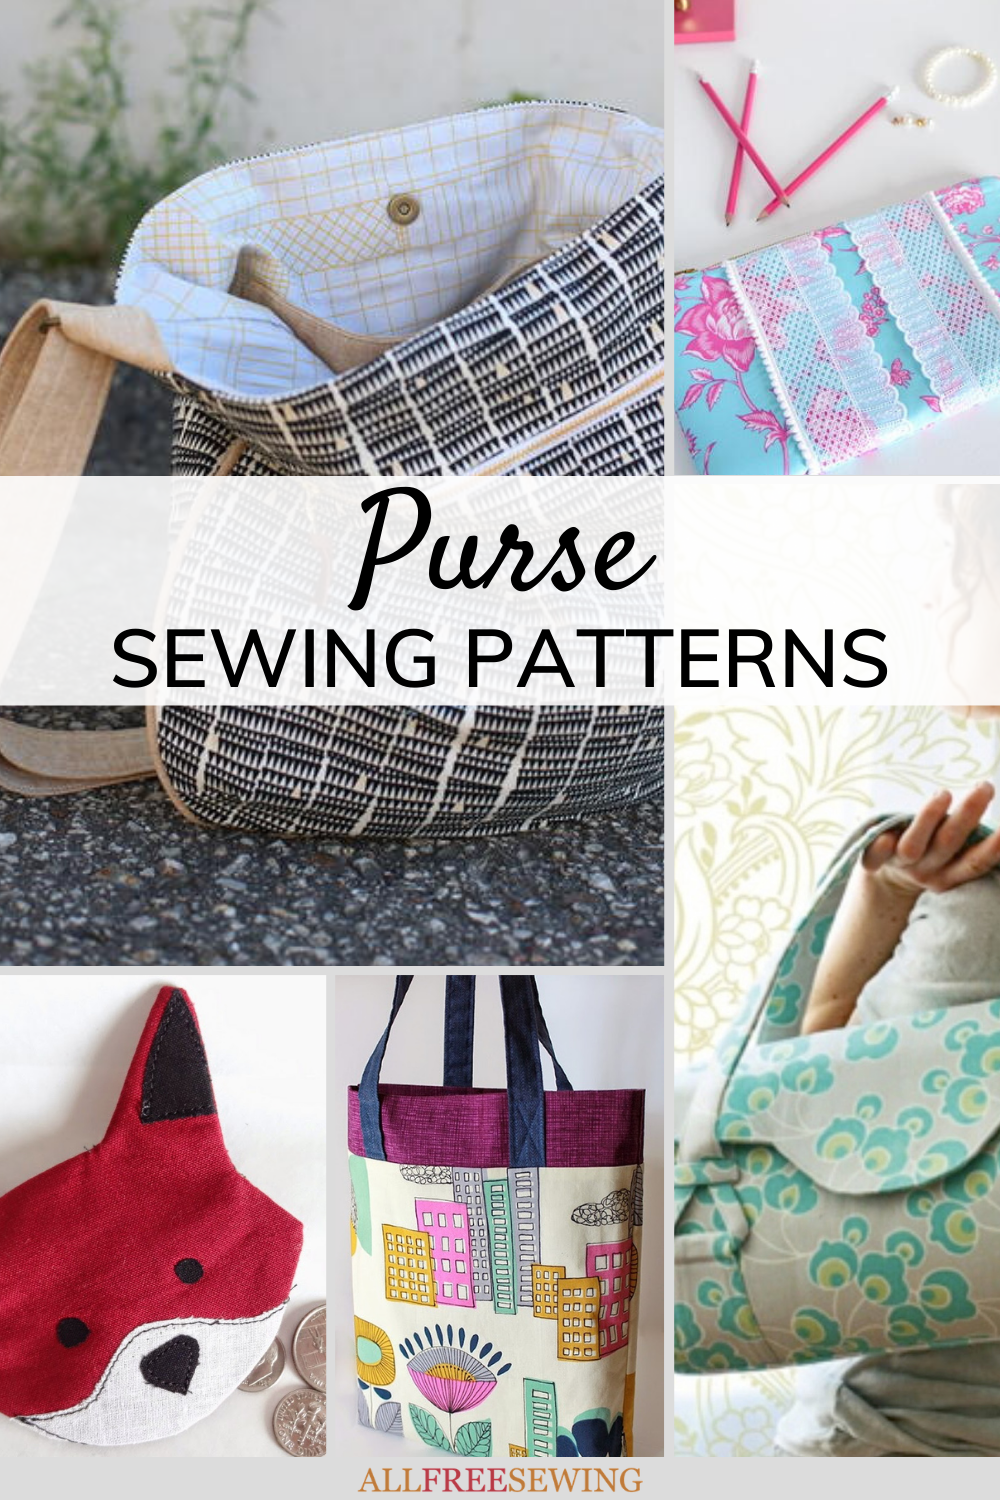 Purse Sewing Patterns pin21 1 UserCommentImage ID 4327197